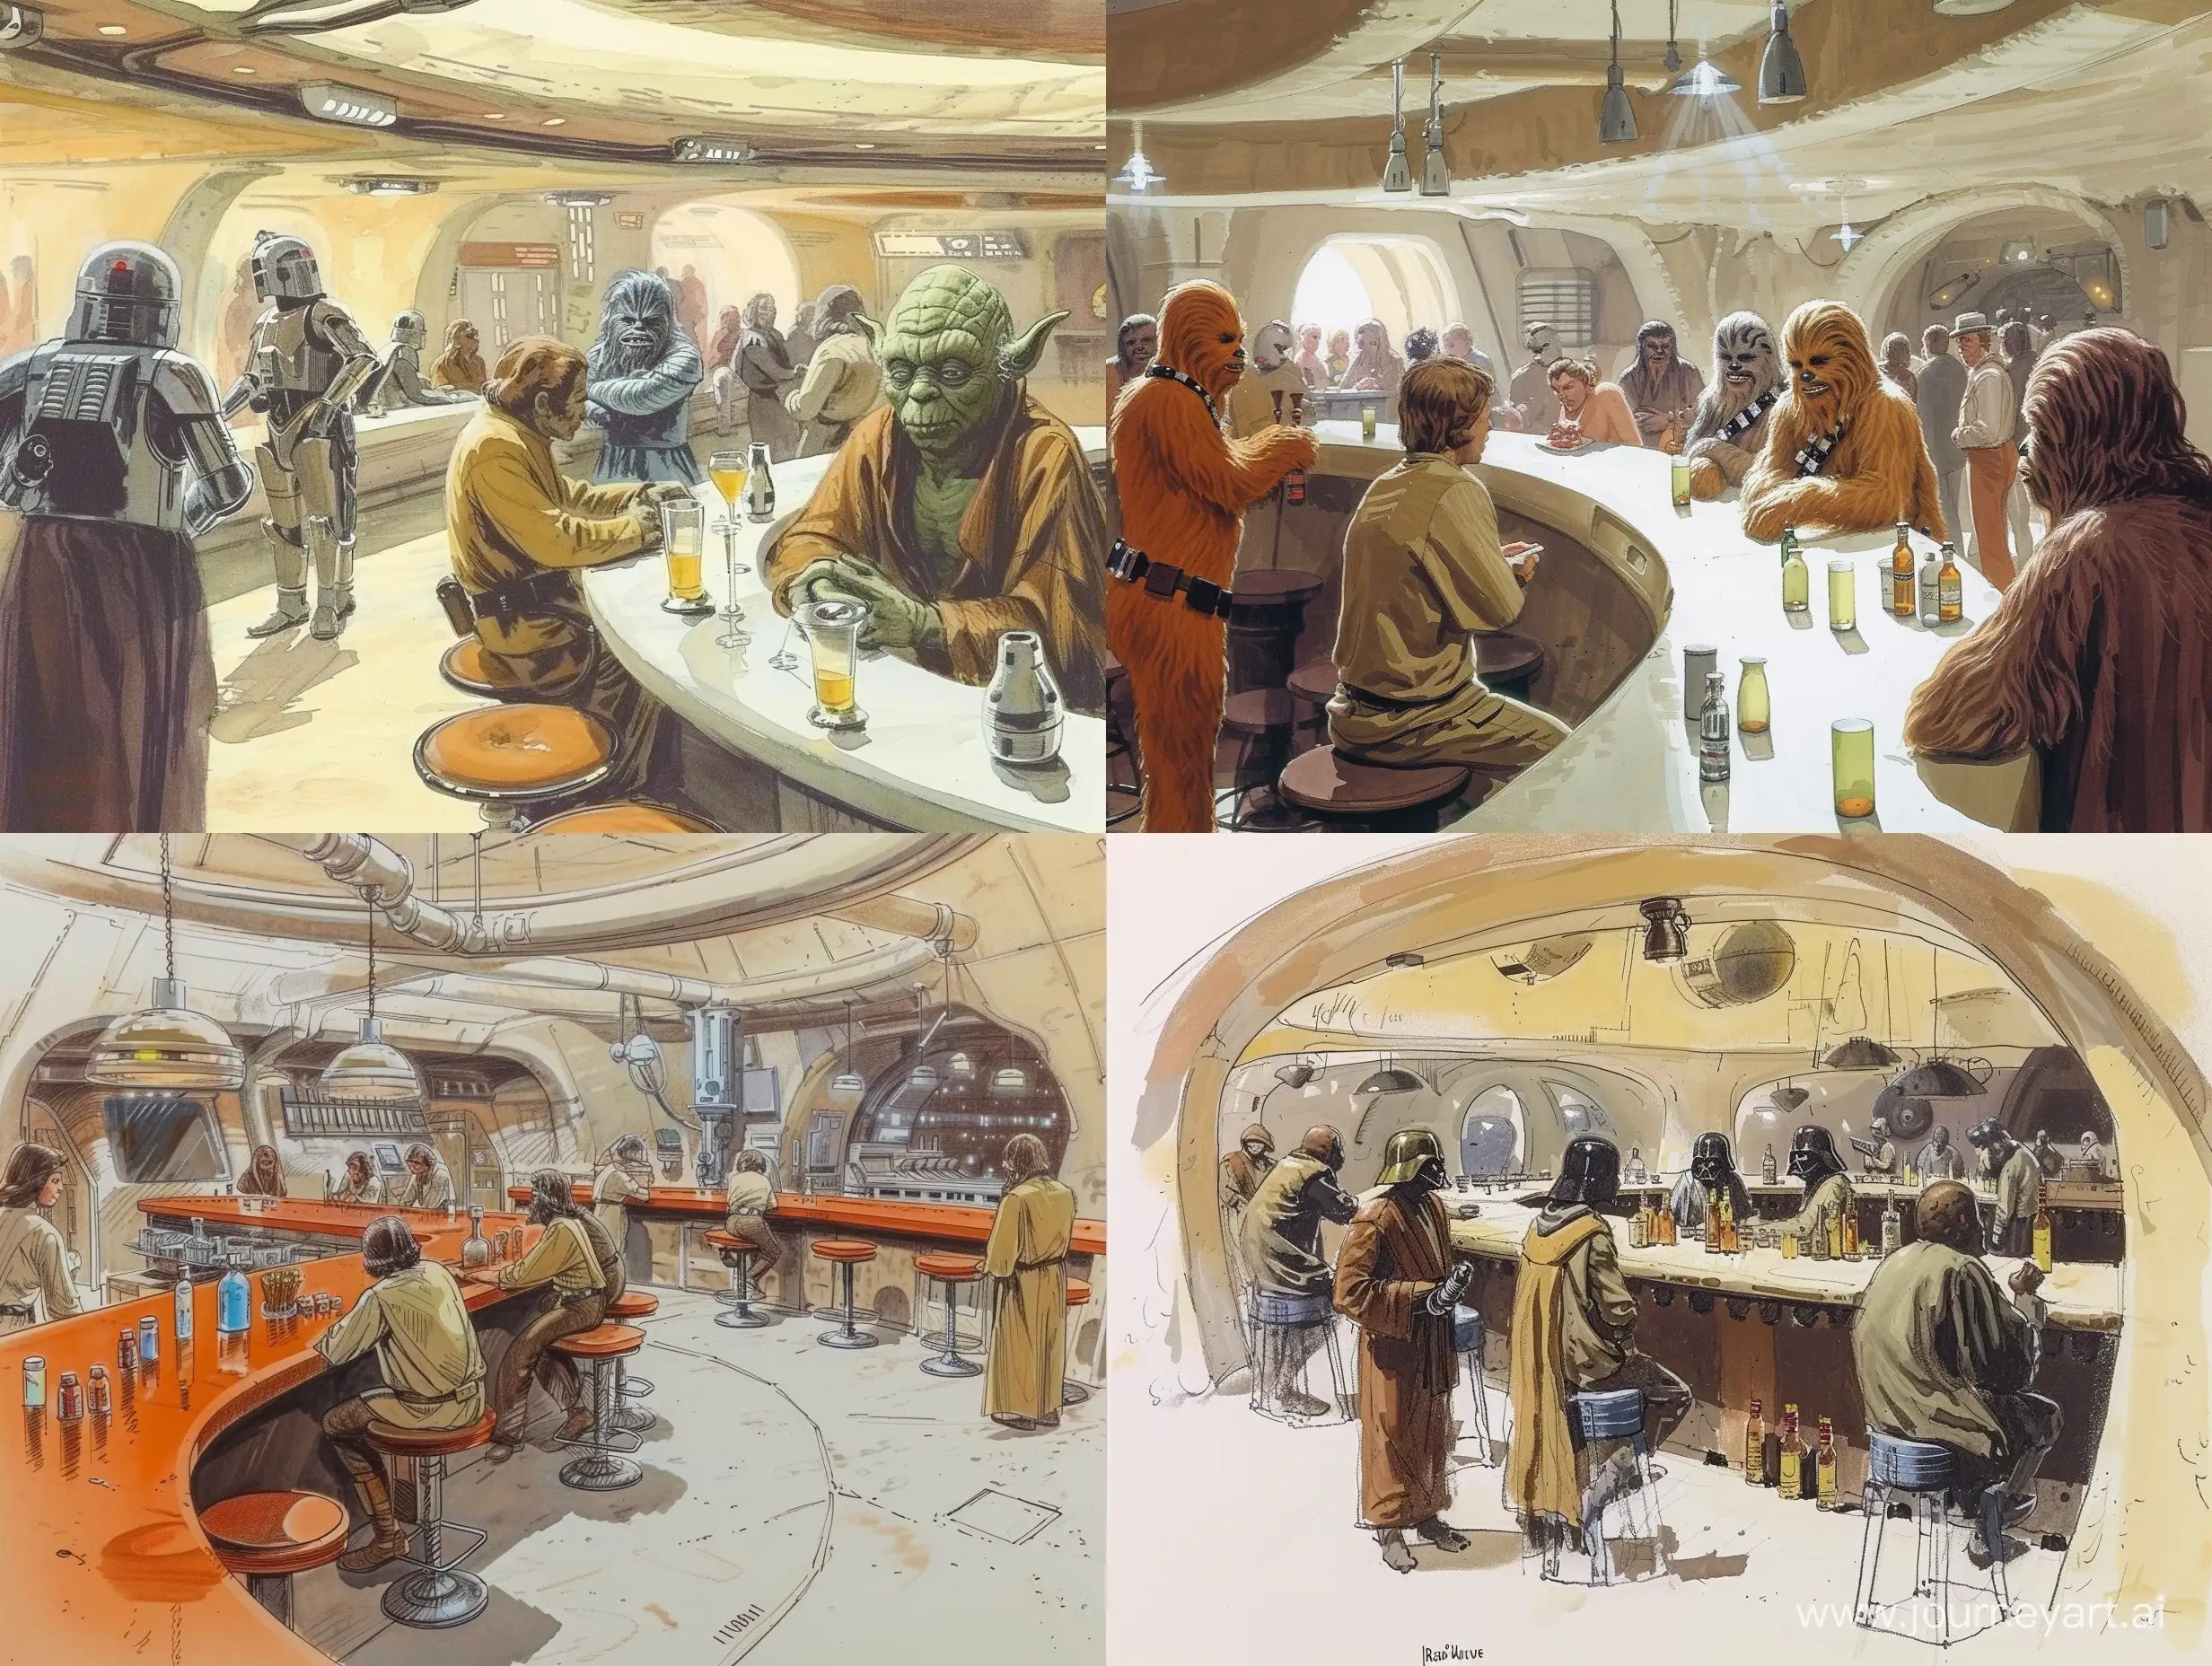 A concept art drawing of a scene from the mos eisley cantina drawn by ralph mcquarrie. 1977. Star wars. in color. retro. 

